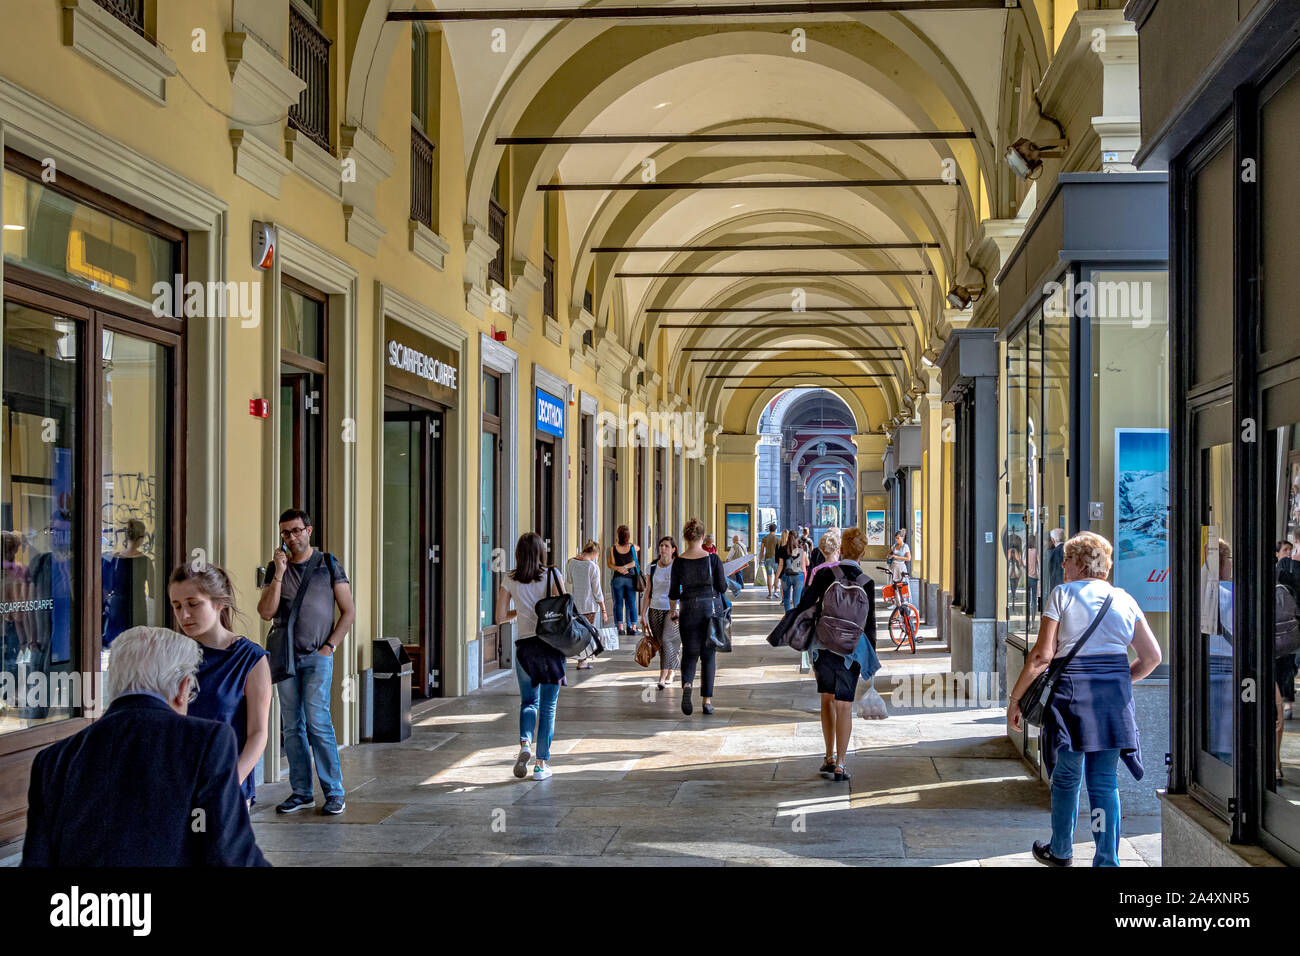 People walking through the elegant colonnaded arcades which run along Piazza Carlo Felice in Turin,Italy Stock Photo